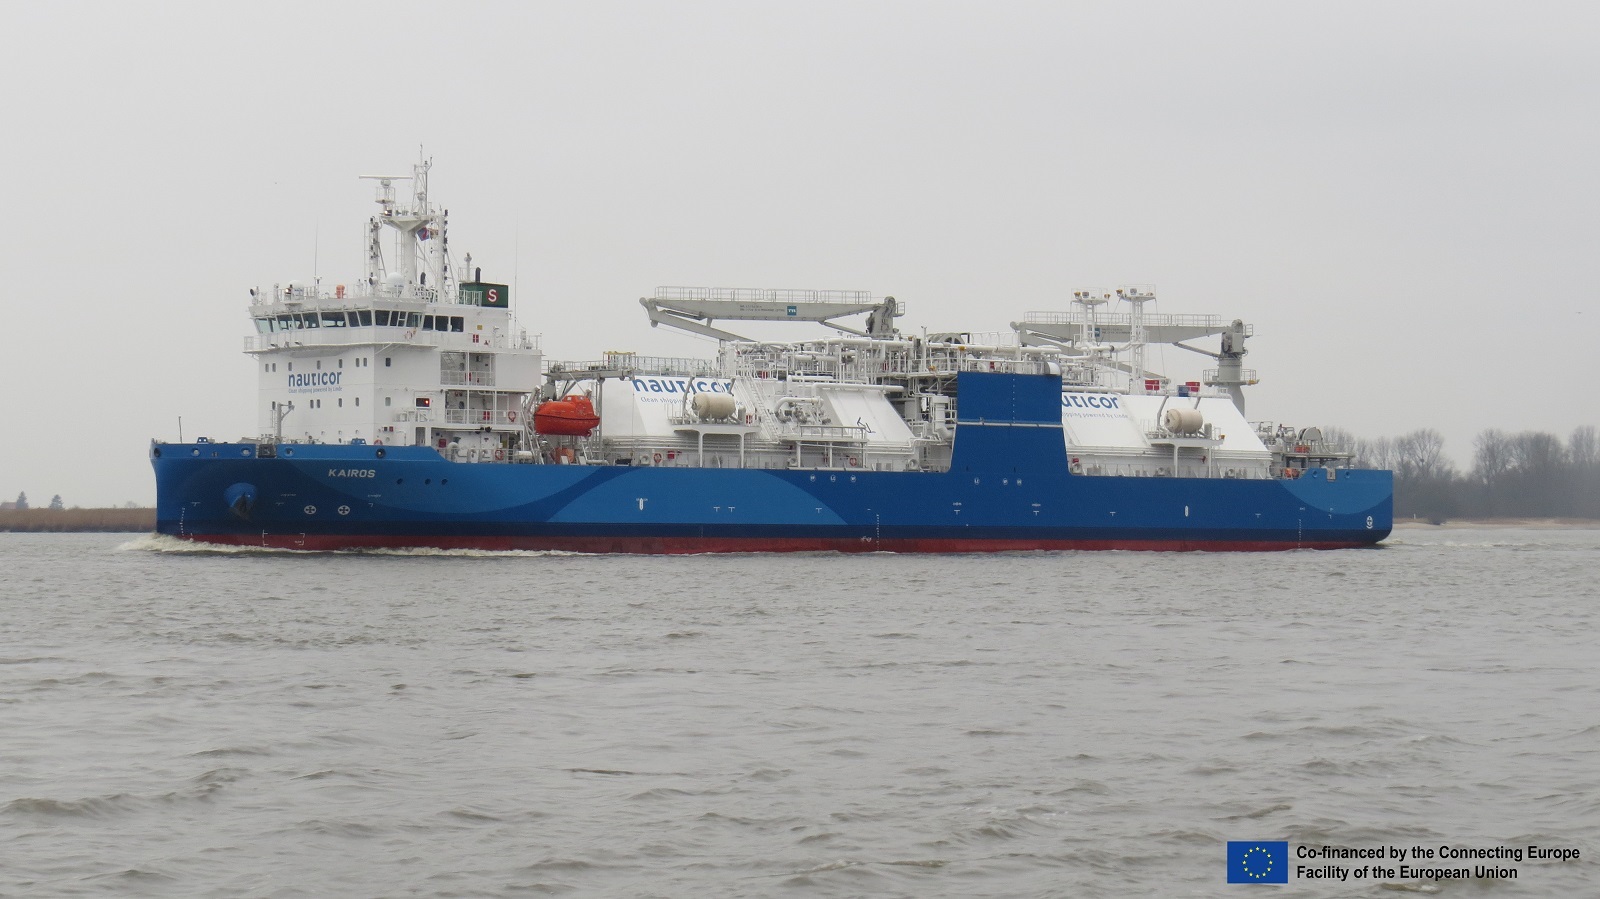 Nauticor’s Kairos received the first LNG bunker license in the Port of Rostock